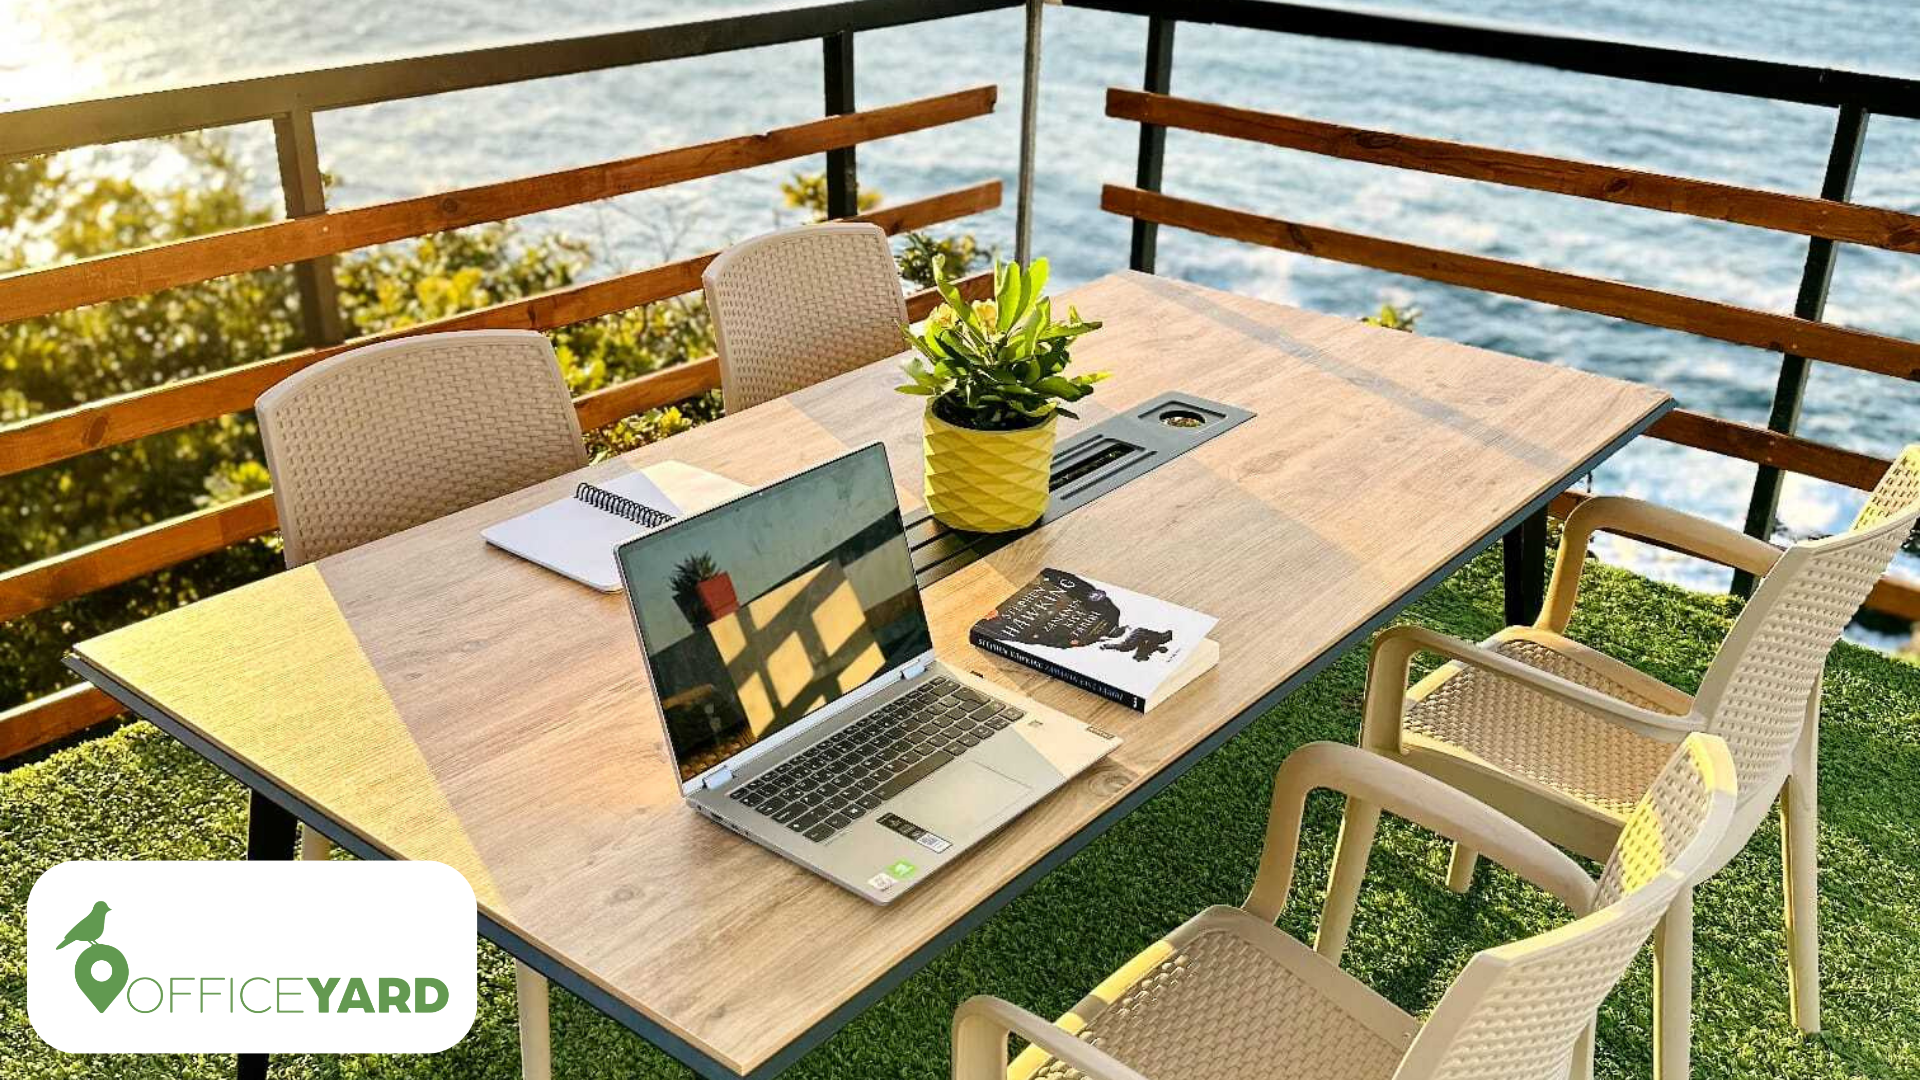 35% Discount at OfficeYard for an Eco-Friendly Work Environment!